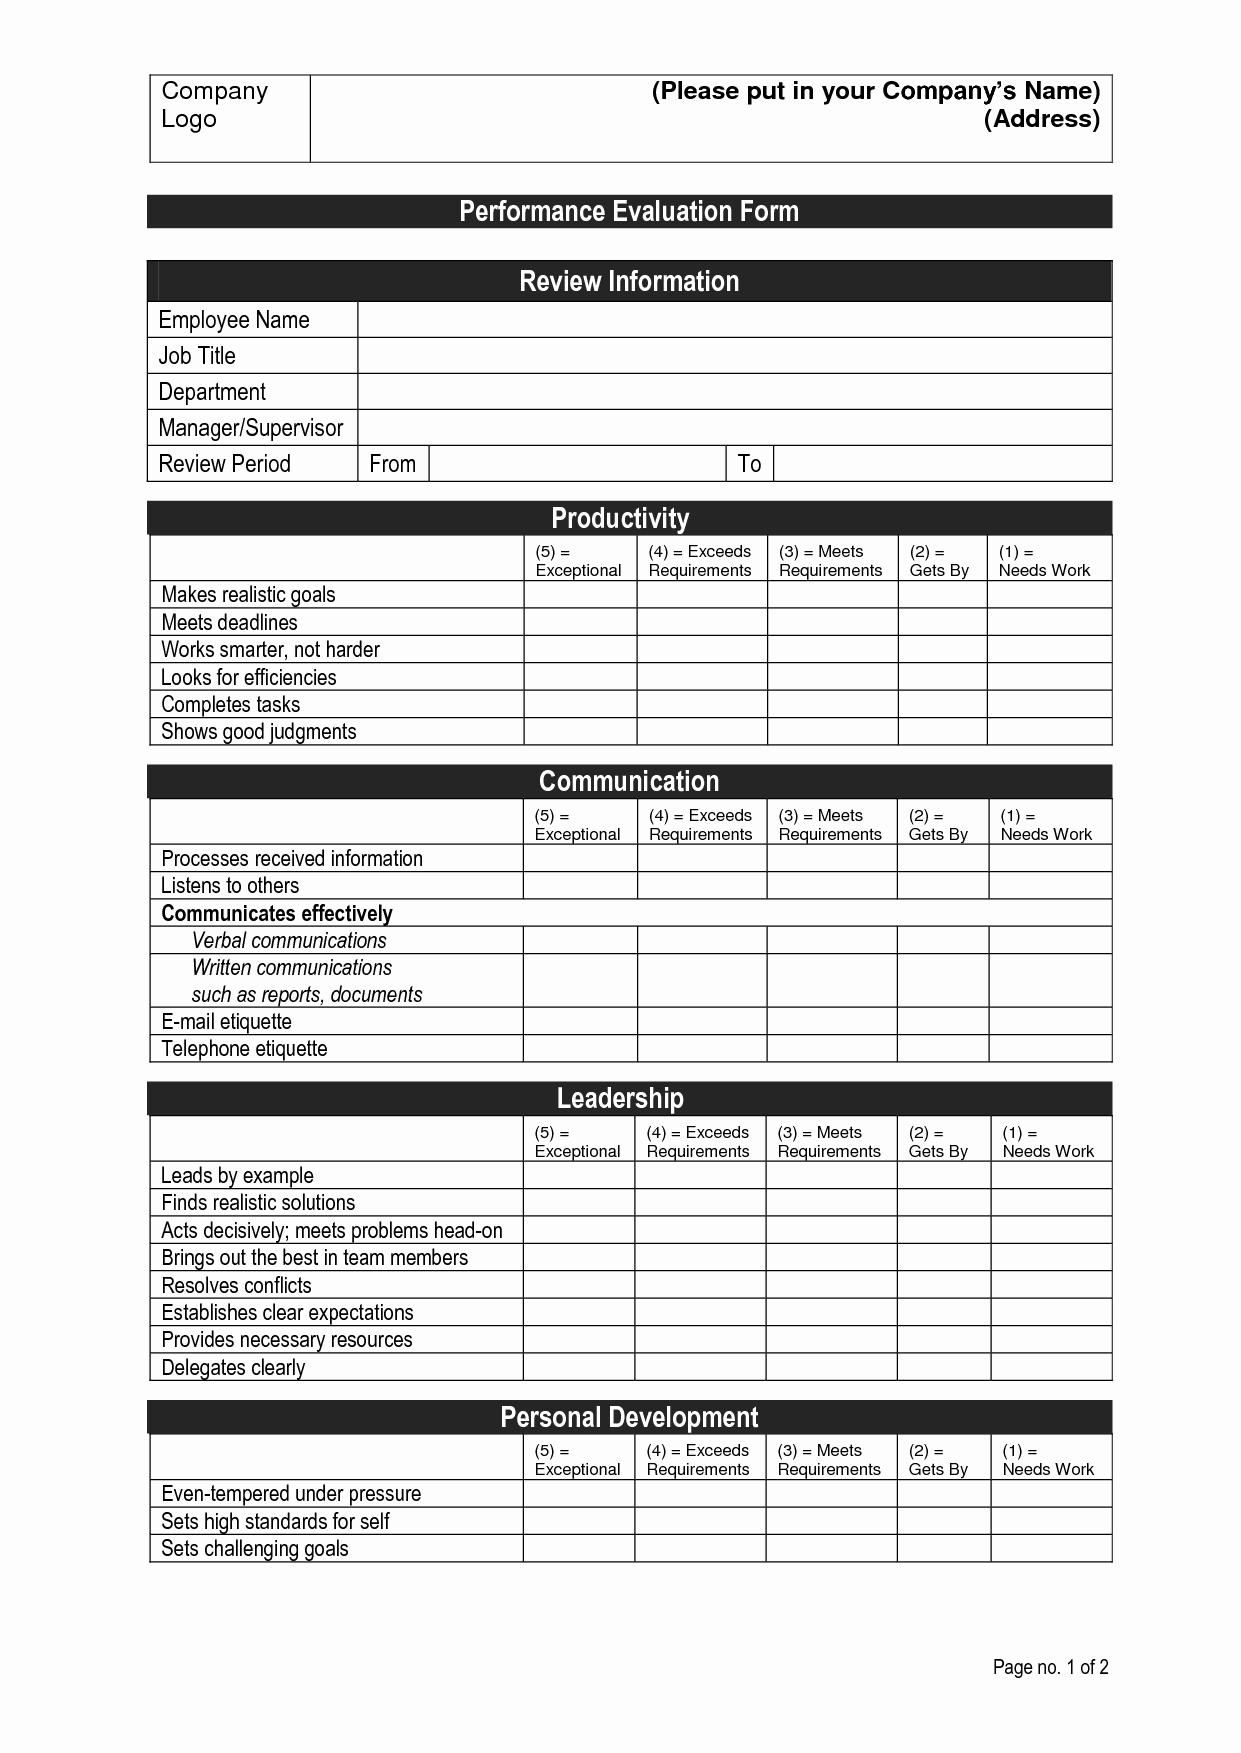 Performance Appraisal form Template Lovely Job Performance Evaluation Frompo 1